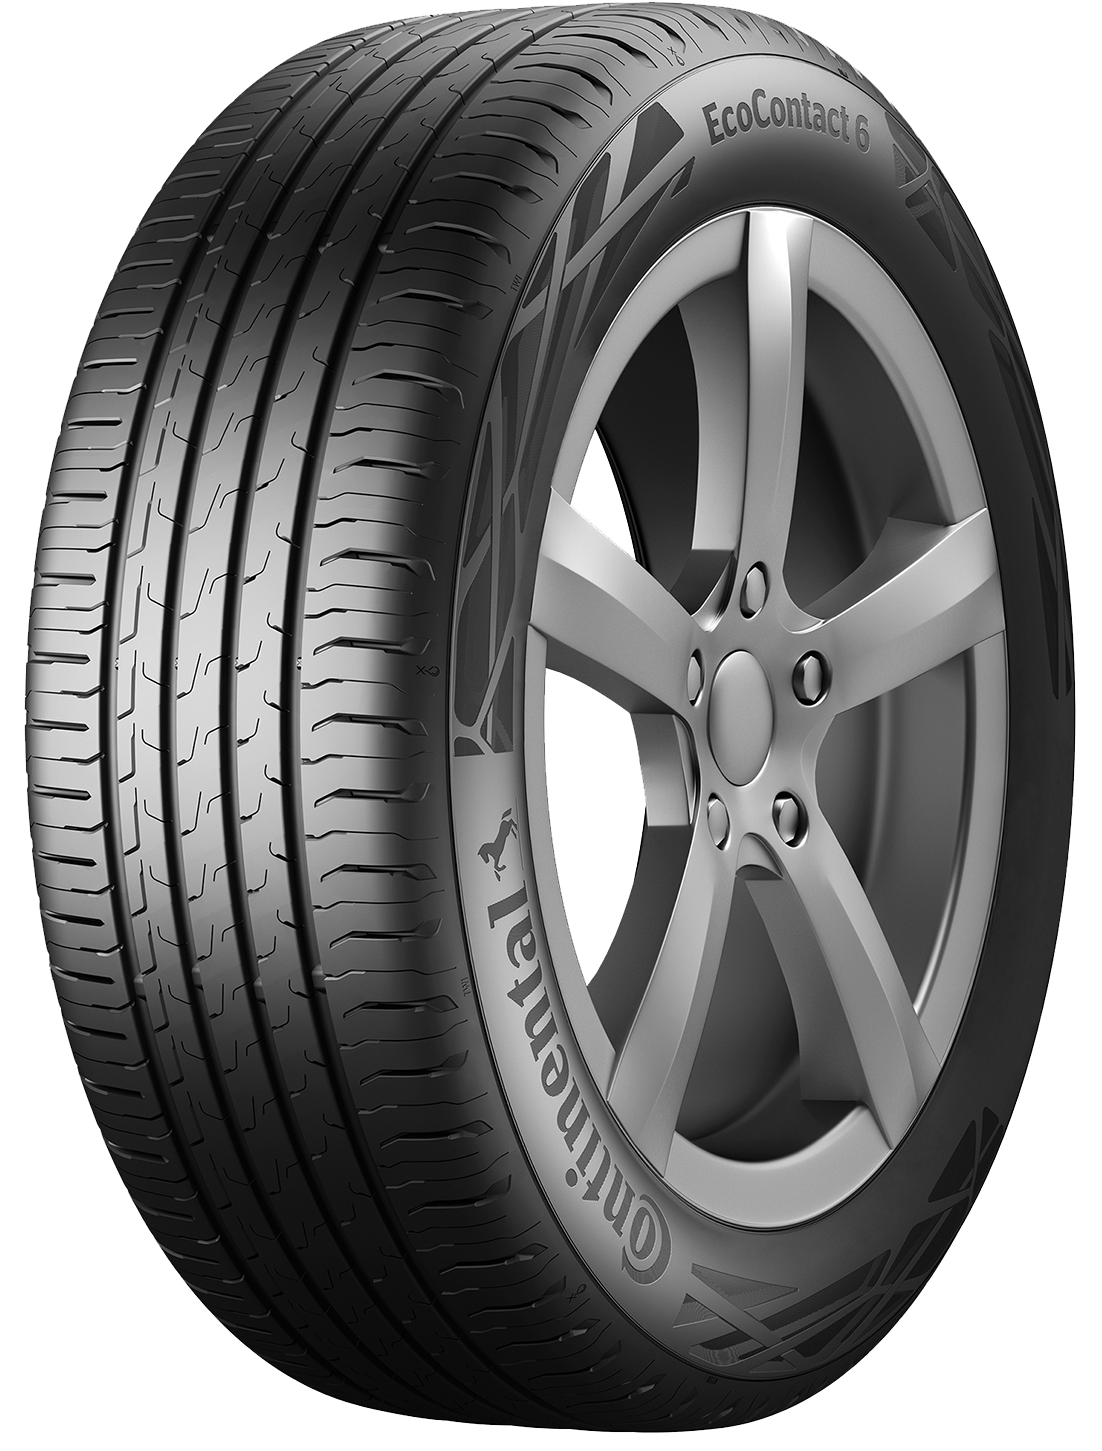 Top Ratings from Resistance Relies Continental – - Rolling on and Both Wet Stellantis e-SUVs Tires AG Continental Grip for for